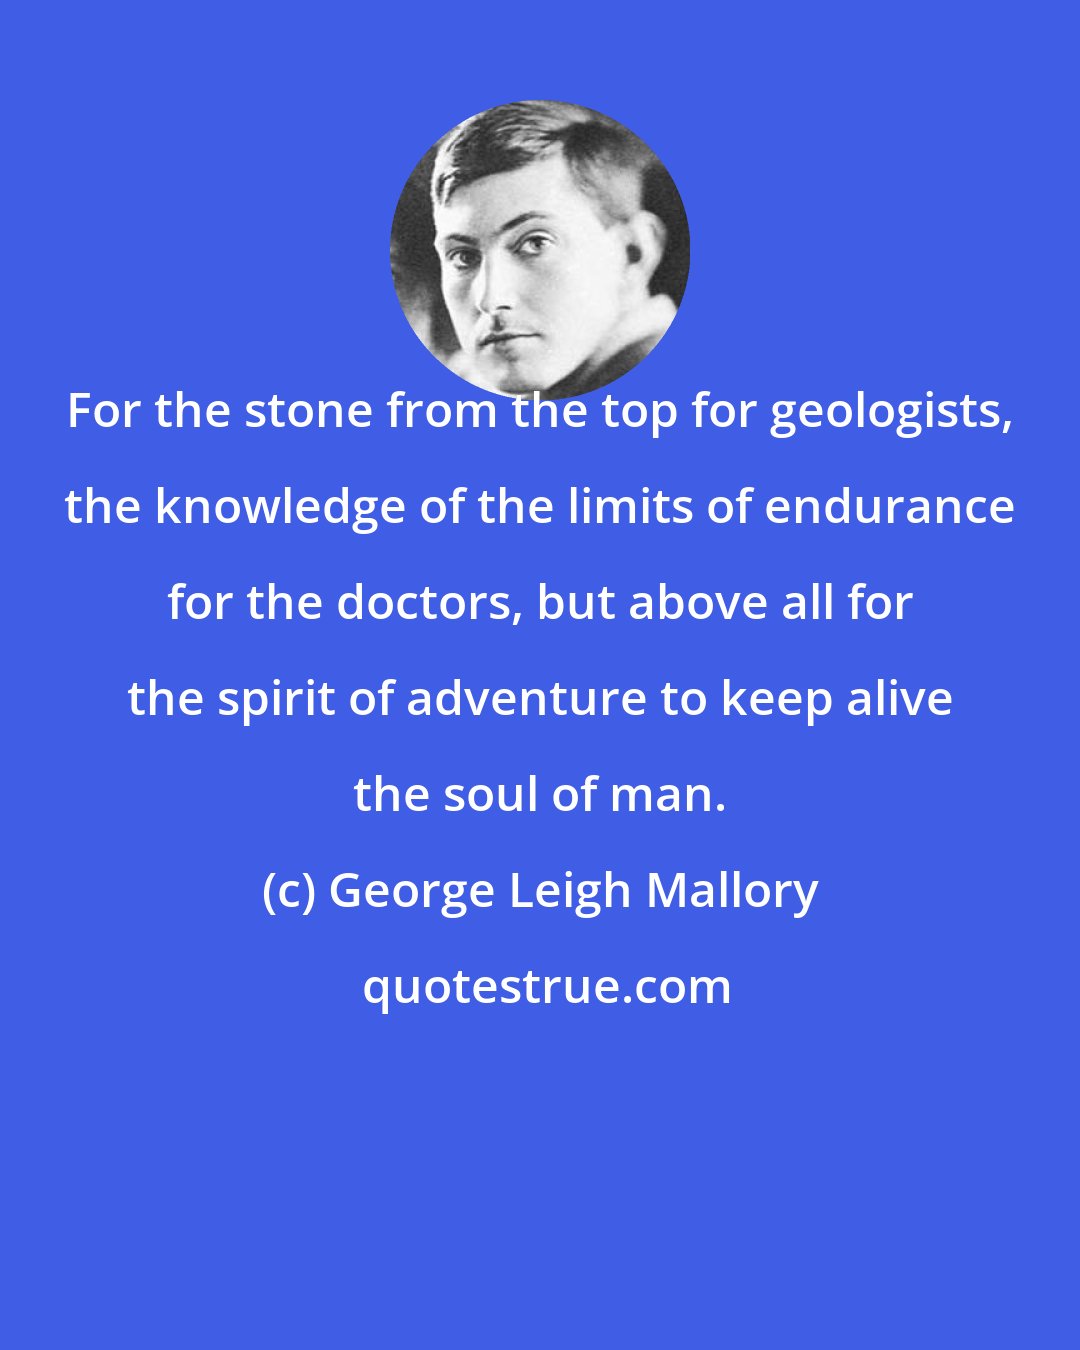 George Leigh Mallory: For the stone from the top for geologists, the knowledge of the limits of endurance for the doctors, but above all for the spirit of adventure to keep alive the soul of man.